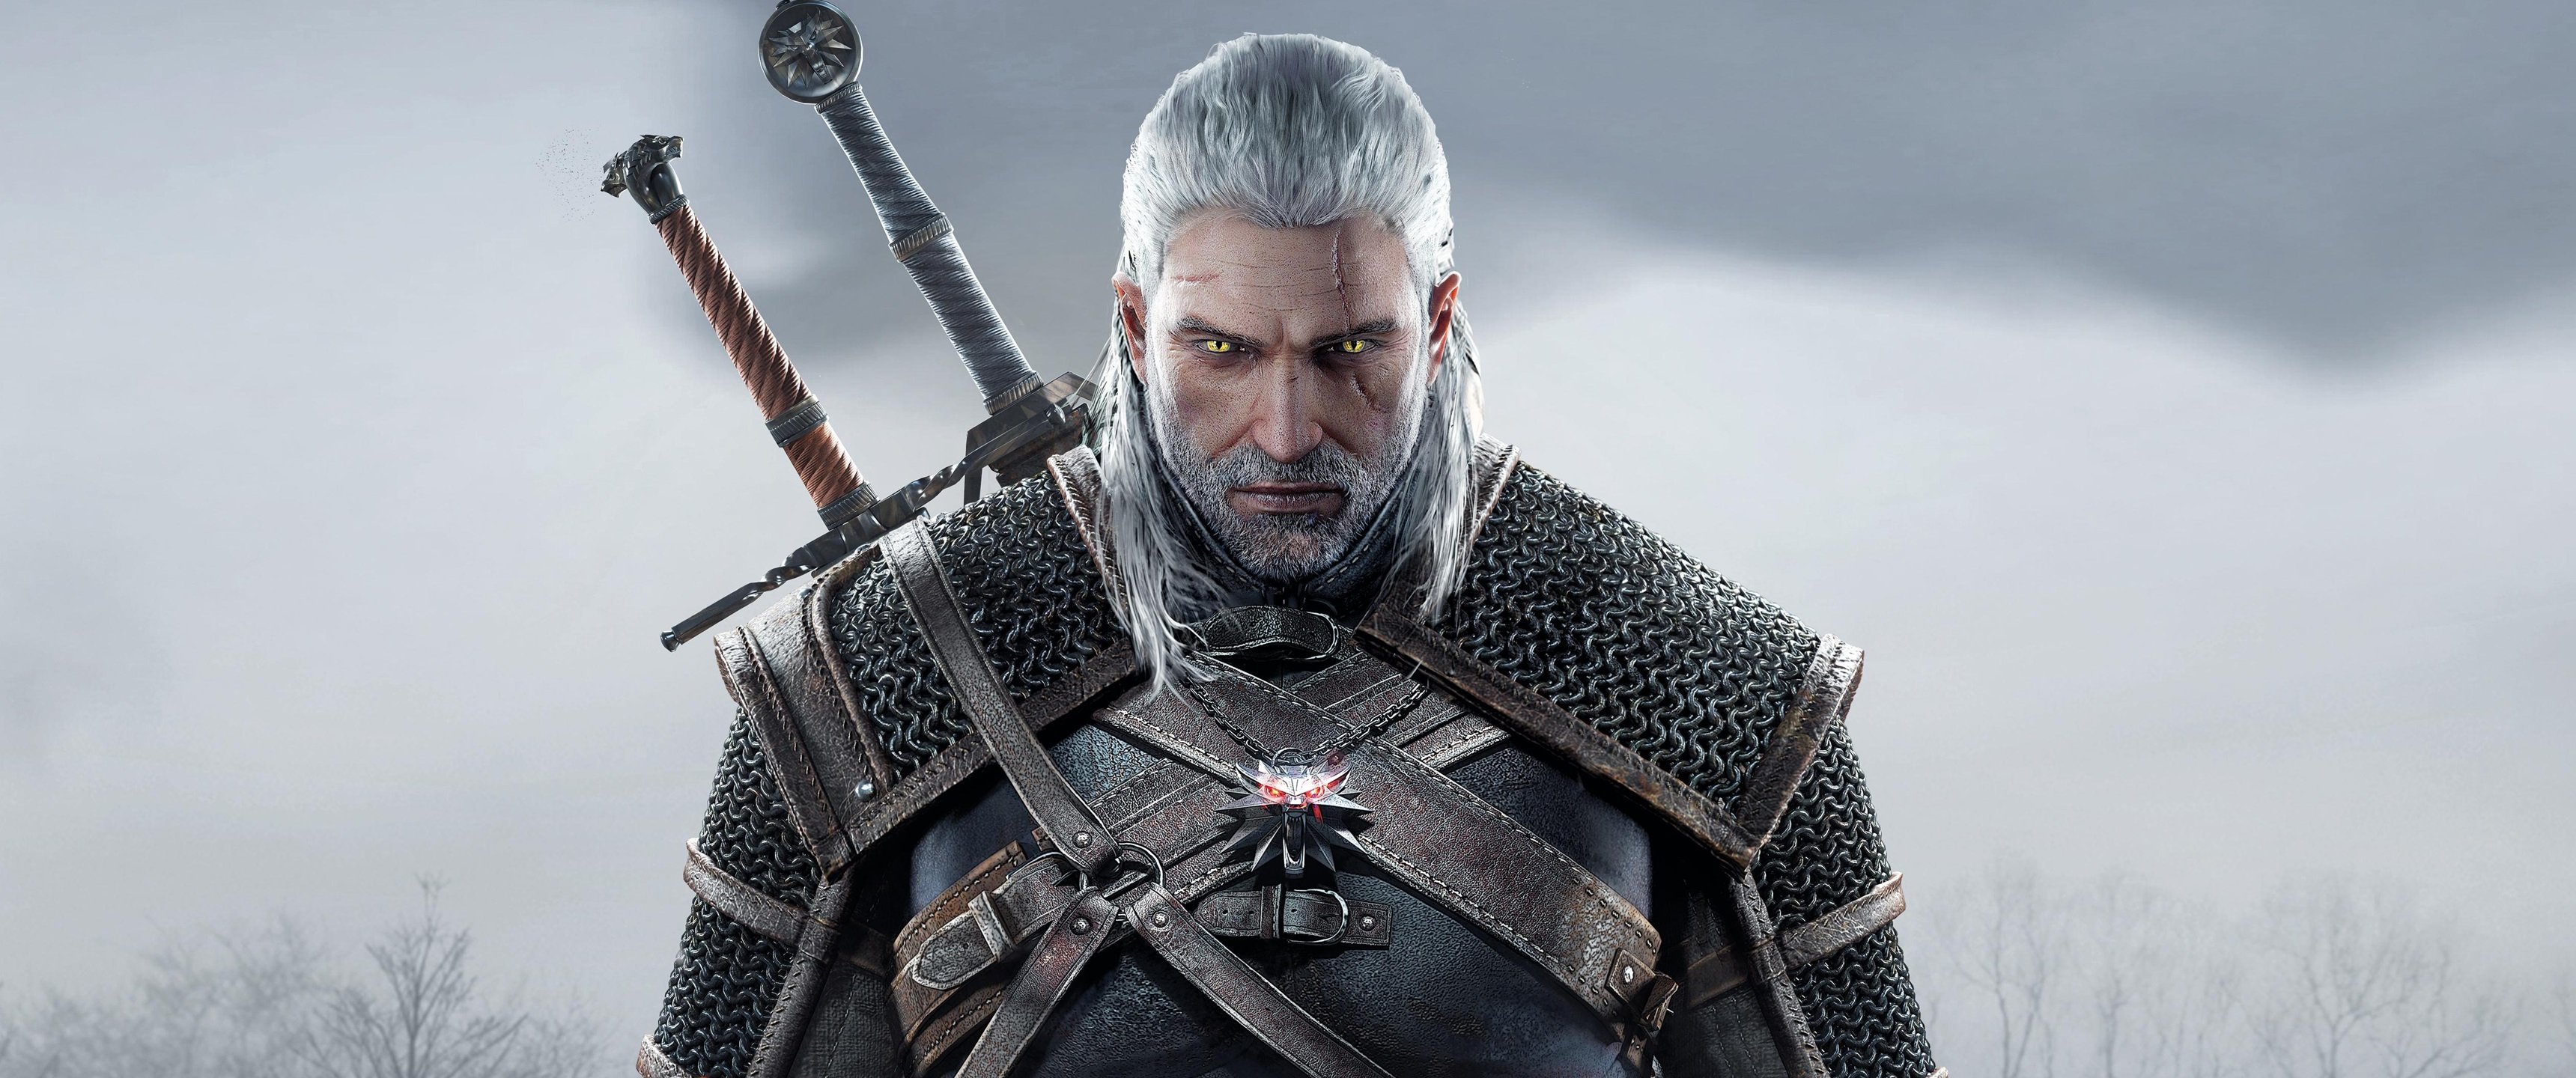 Geralt of Rivia, White hair, Men, The Witcher, Video games, Ultra wide, Sword, The Witcher 3: Wild Hunt Wallpaper